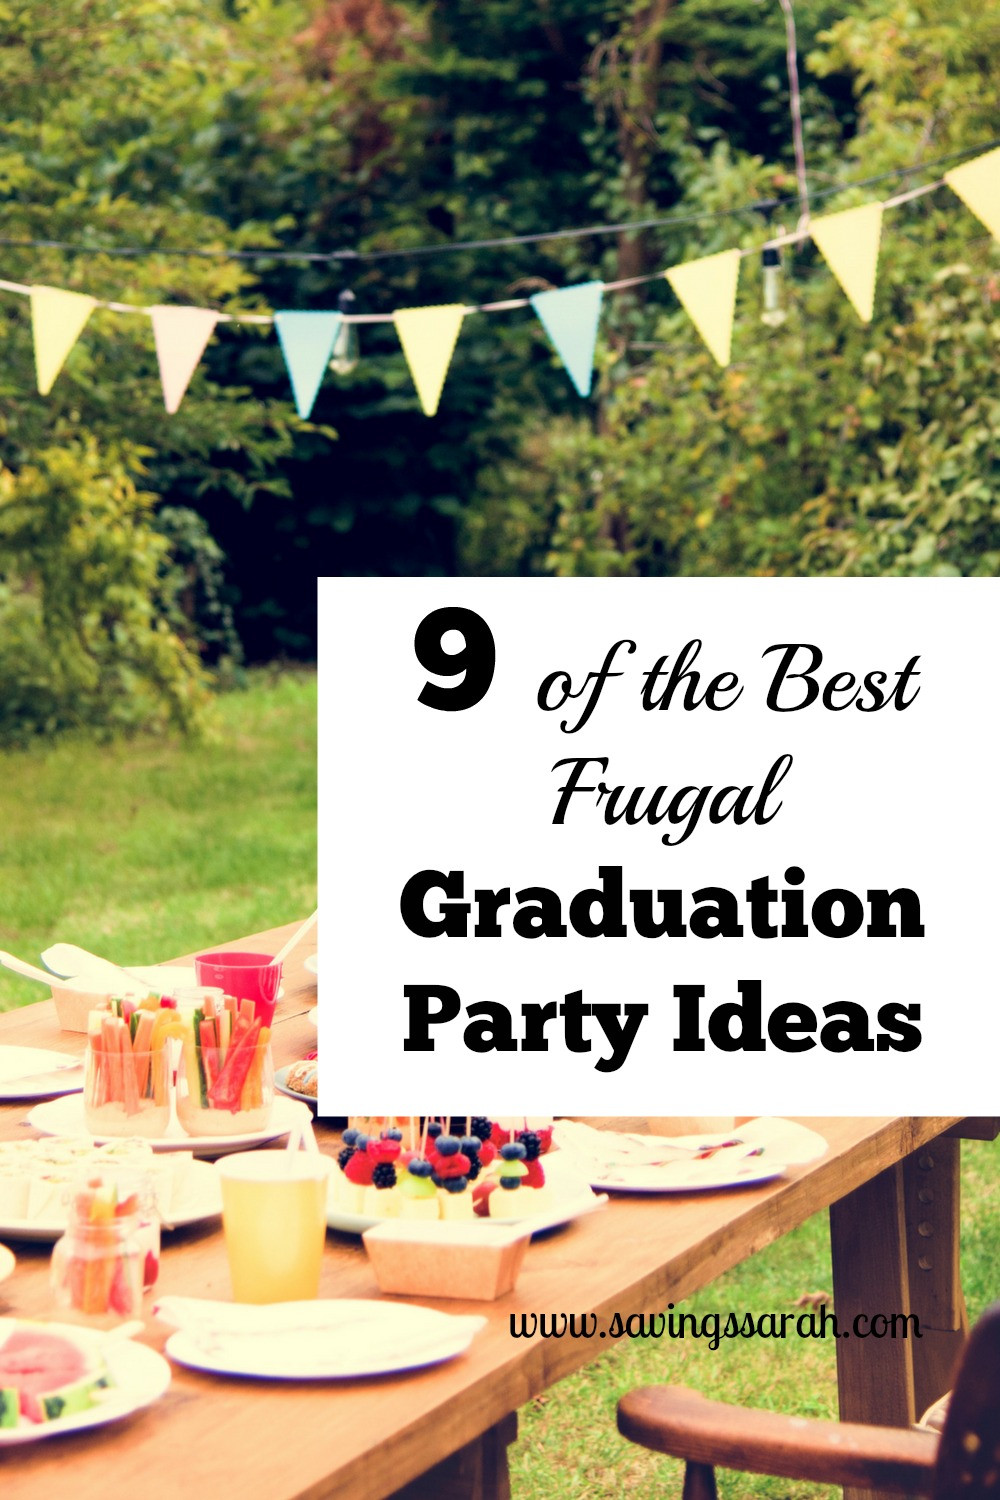 Graduation Party Photo Ideas
 9 the Best Frugal Graduation Party Ideas Earning and